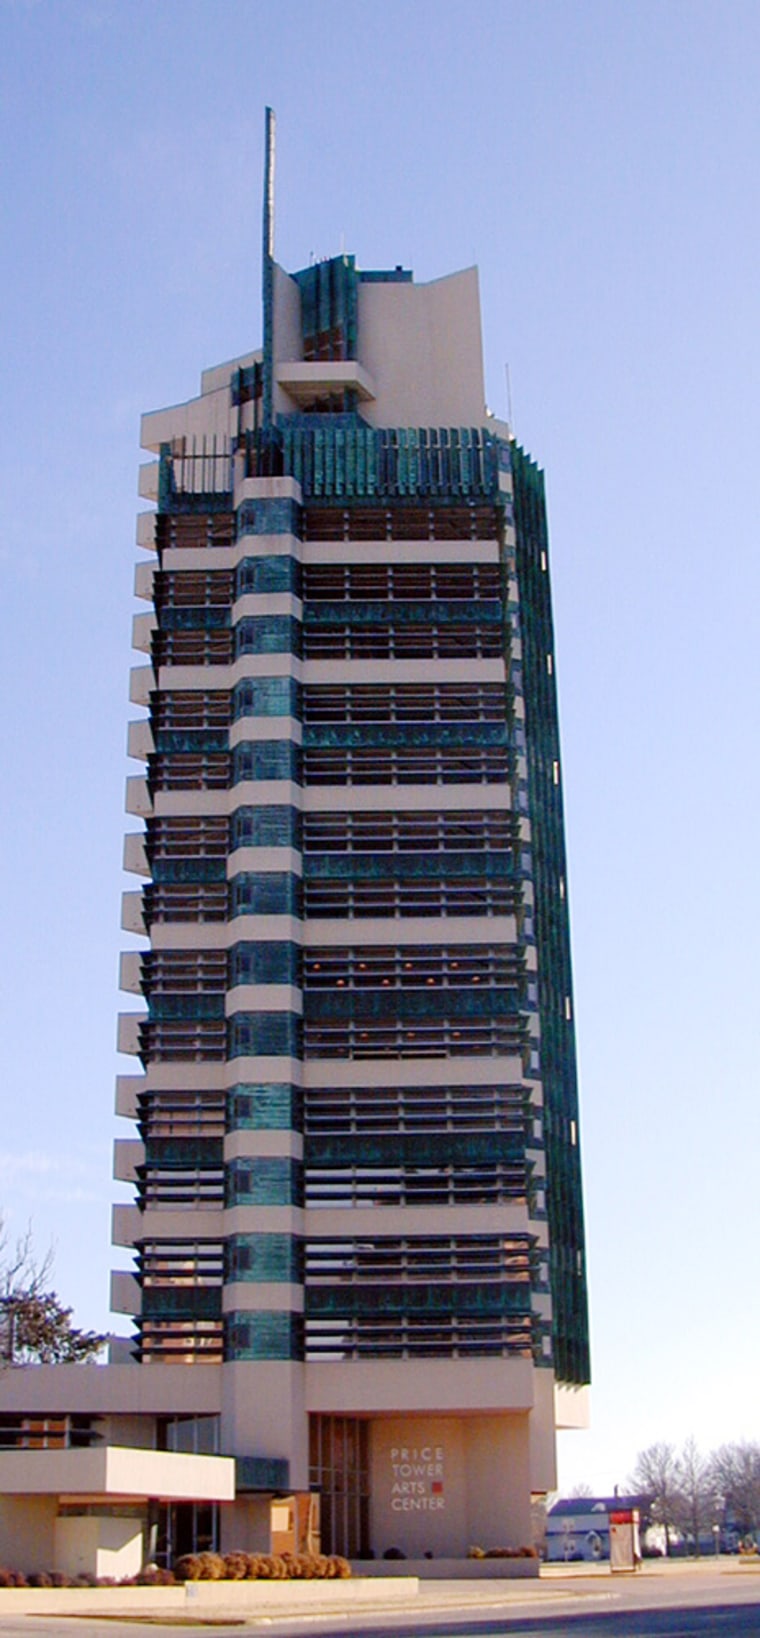 The Price Tower in Bartlesville, Okla., designed by architect Frank Lloyd Wright and completed in 1956, is pictured in this file photo. The Tower has been designated by U.S. Interior Secretary Dirk Kempthorne as a National Historic Landmark. 